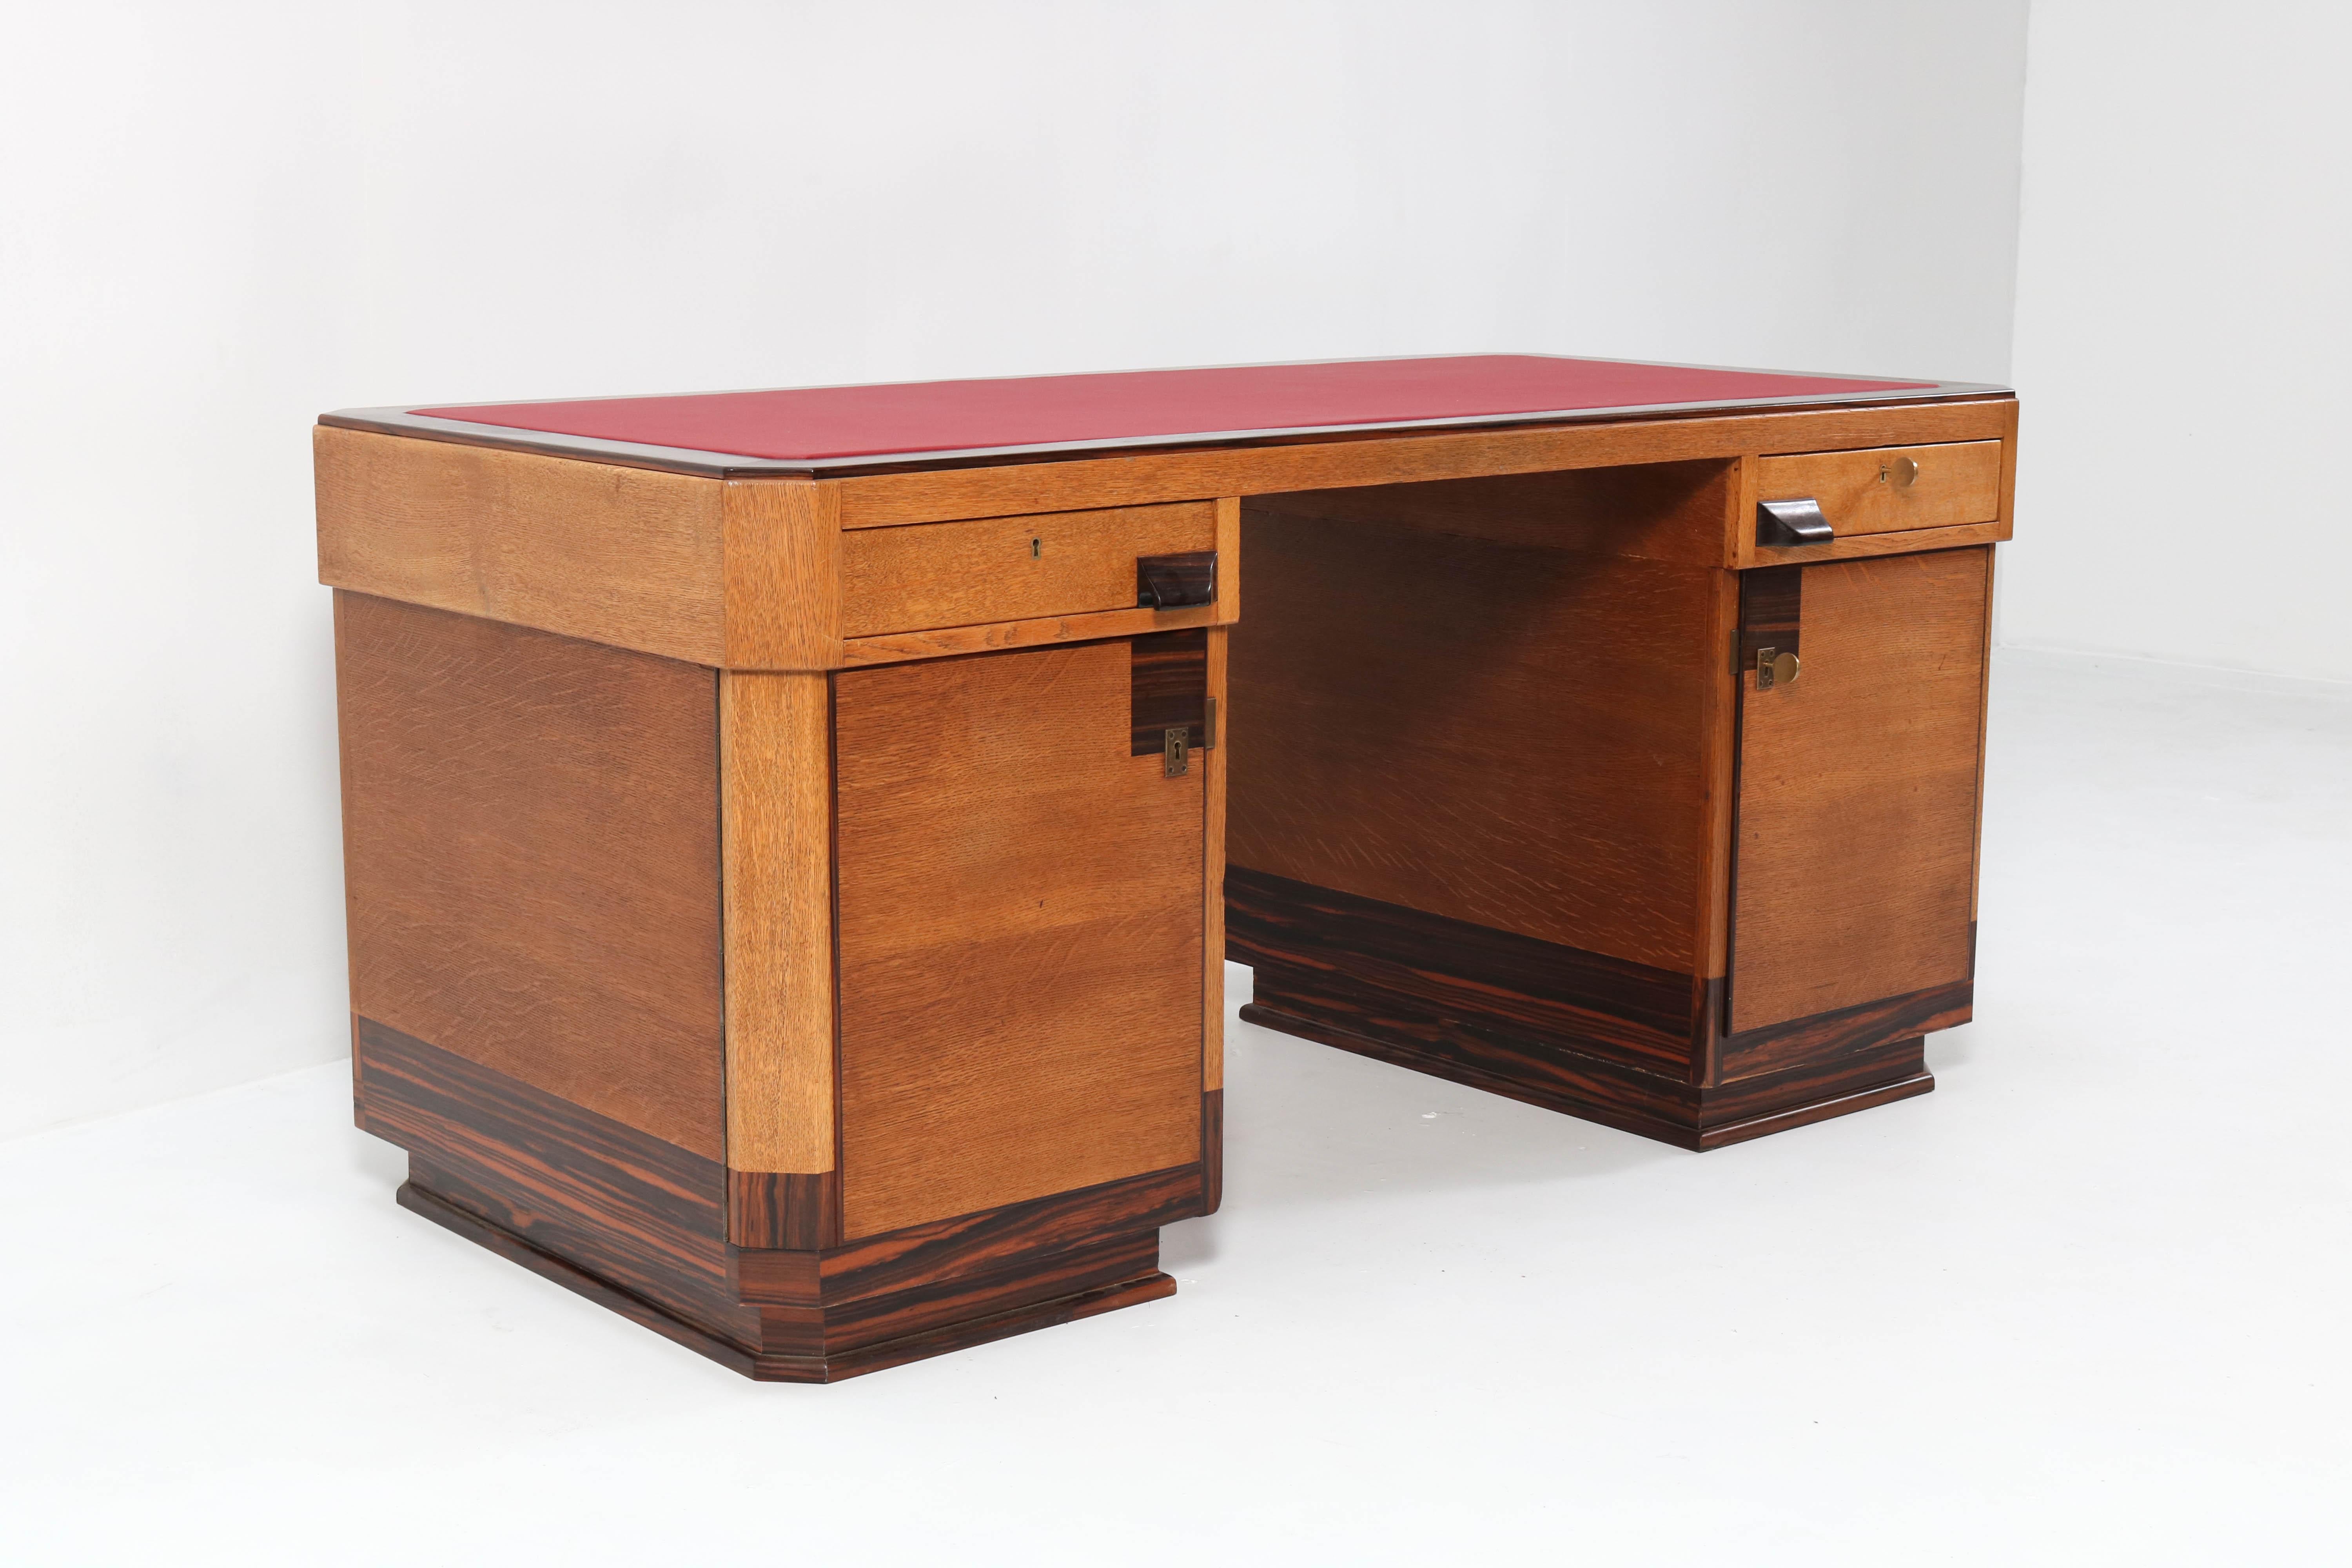 Stunning and rare Art Deco Haagse School pedestal desk.
Design by Anton Lucas Leiden.
Striking Dutch design from the 1920s.
Solid oak with oak veneer and solid ebony Macassar handles and lining.
The top is redone with red faux leather.
This